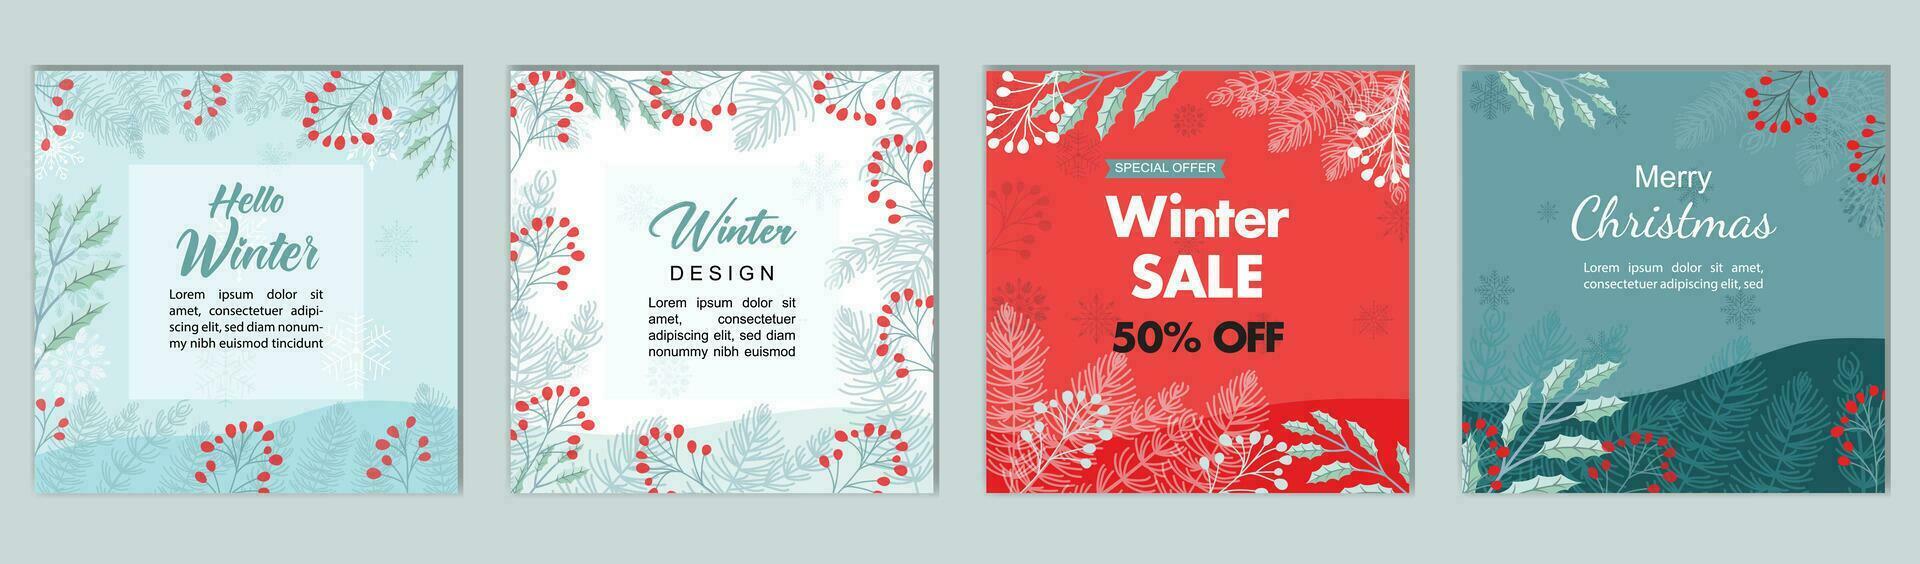 Winter Holidays square templates. Winter sale social media post frame with Christmas tree shape, snowflakes and red berries vector